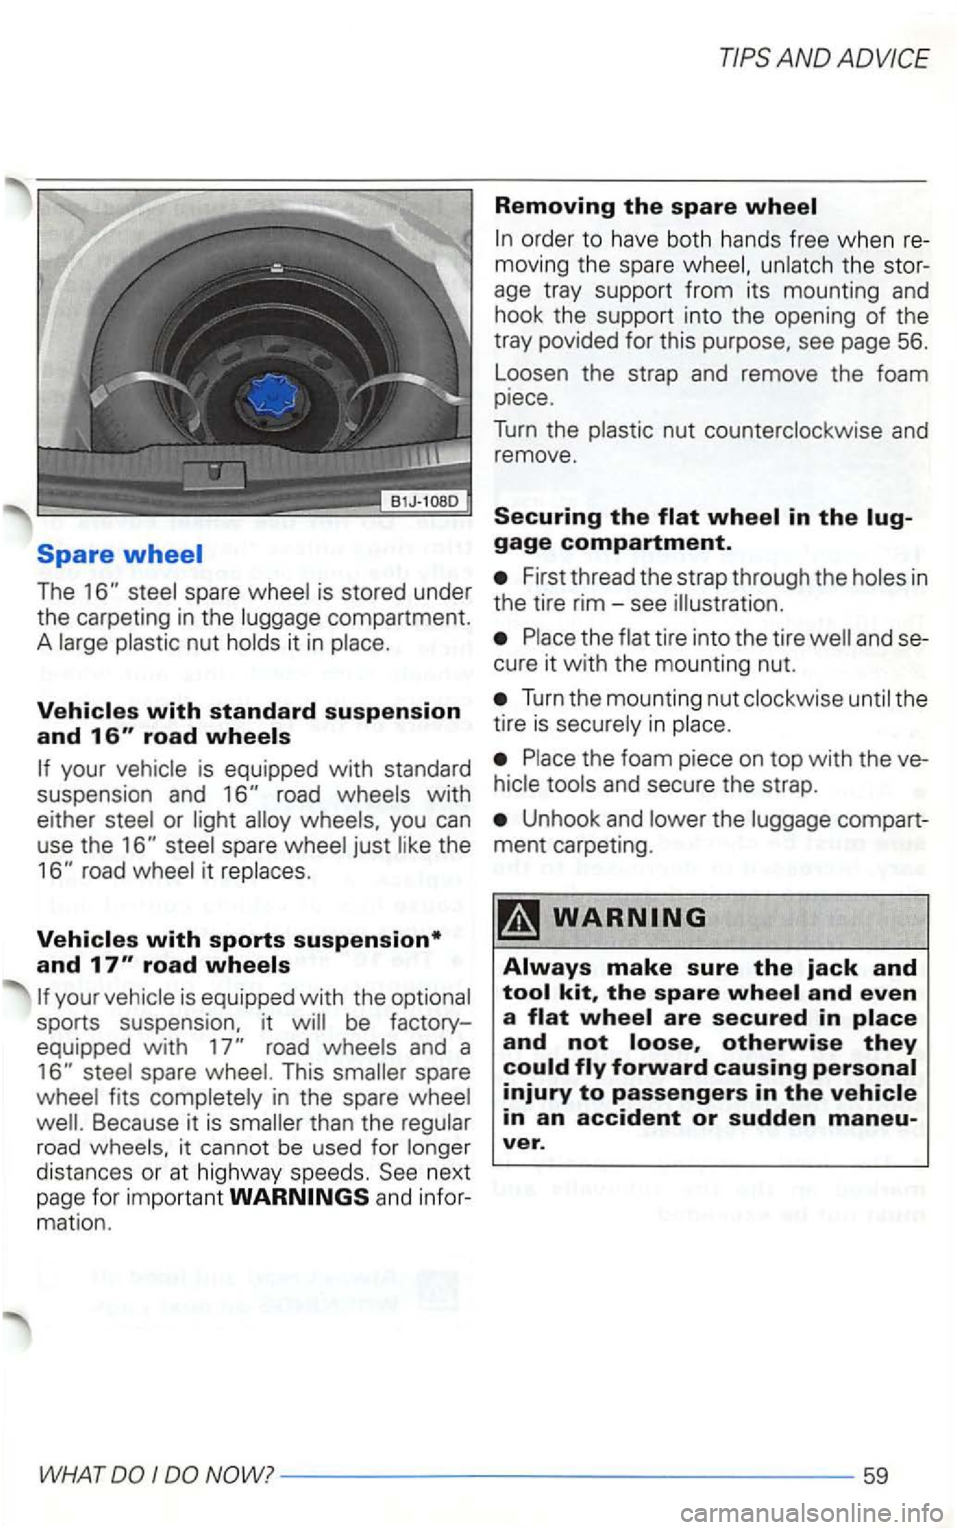 VOLKSWAGEN GOLF 2003  Owners Manual AND 
Removing the spare wheel 
order  to  have  both hands  free when re­moving  the spare t he  stor­
age  tray  su pport  from  its mounti ng and 
hook  the support  into  the  opening of the 
tra